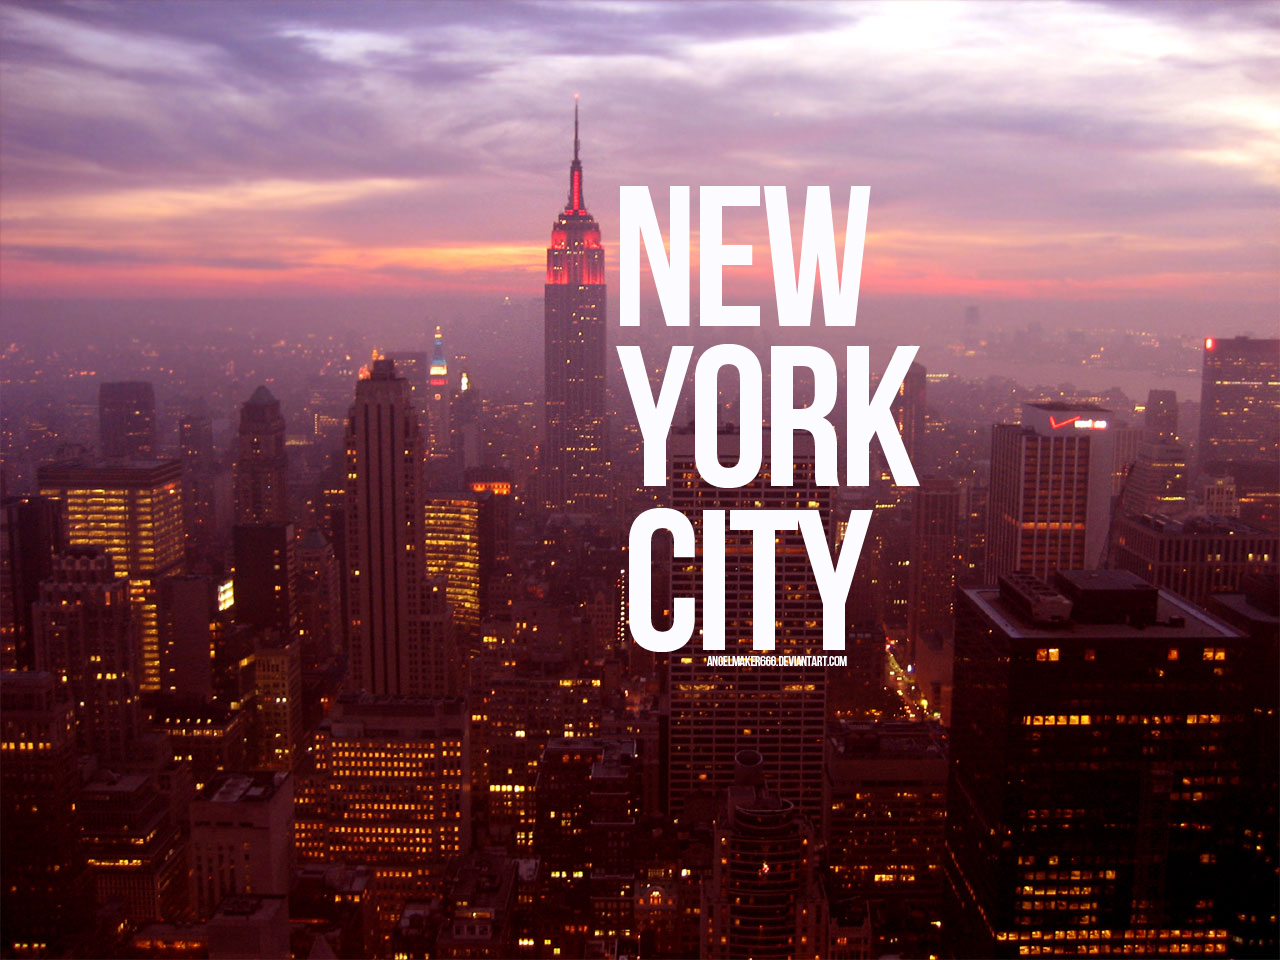 New York City Wallpaper by IshaanMishra on